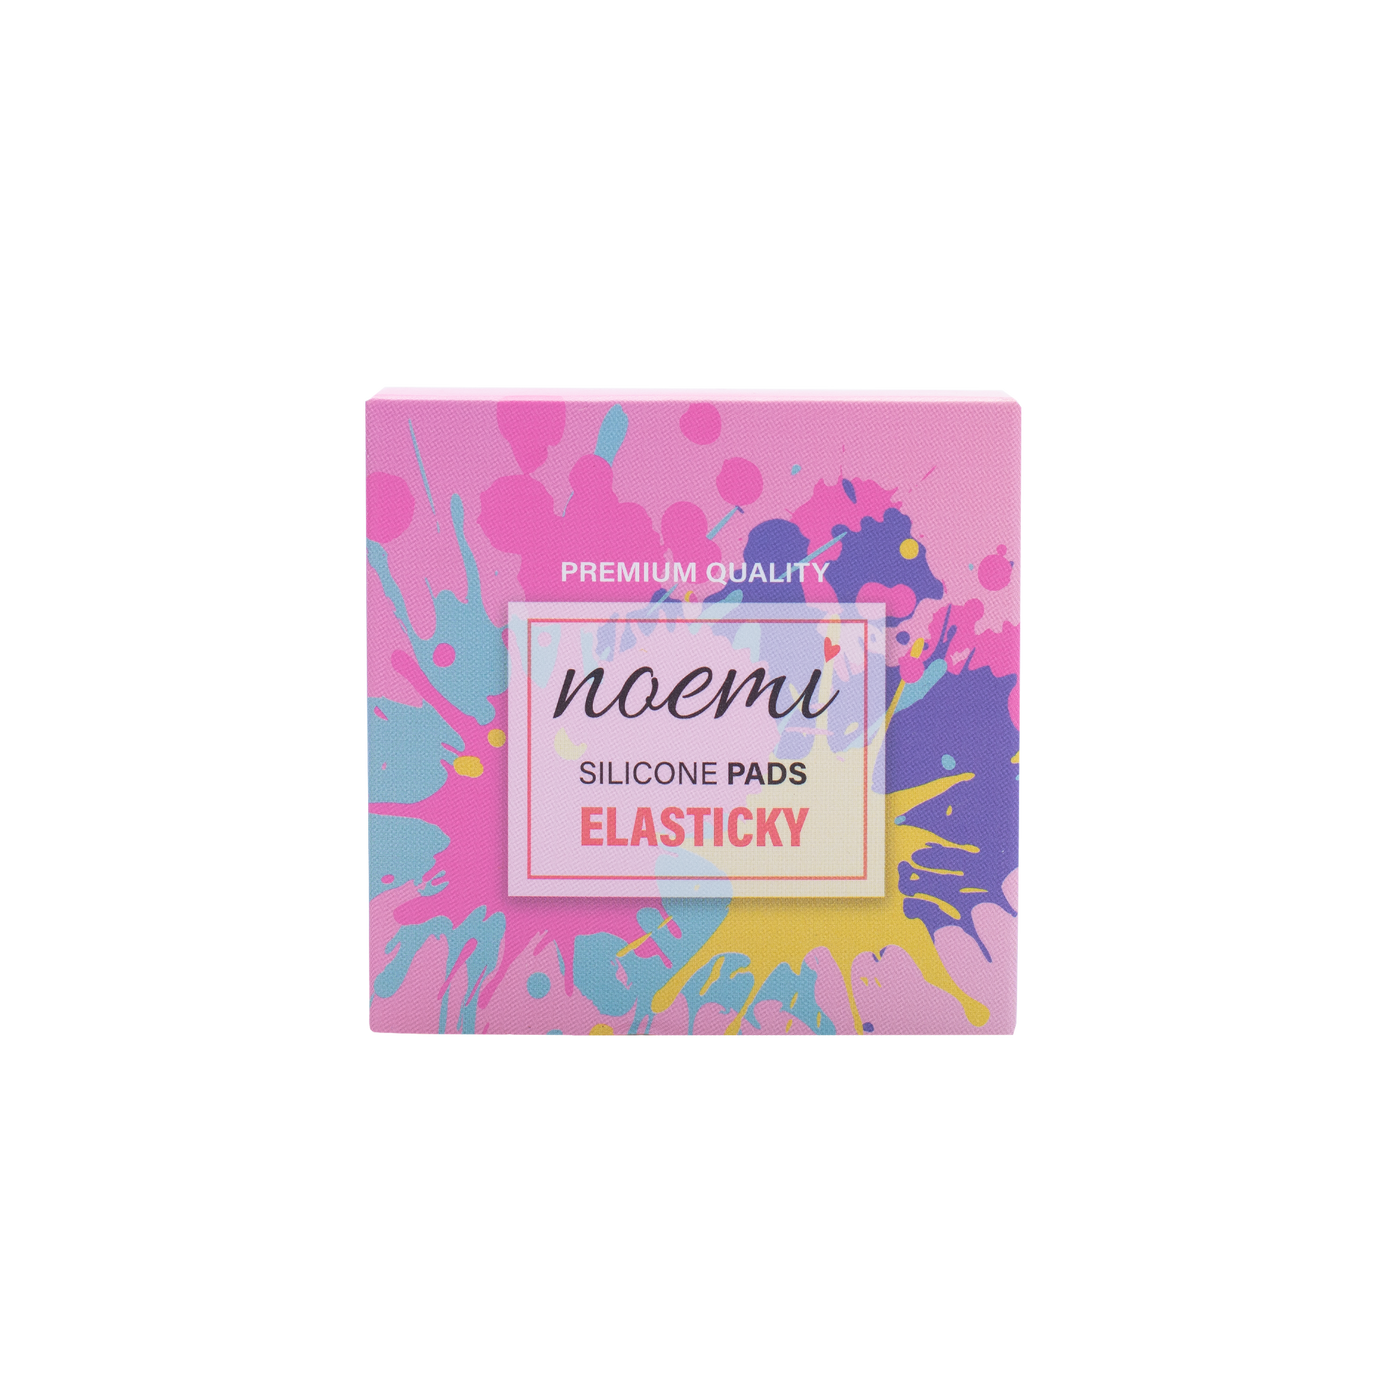 Noemi - Silicone Pads Elasticky (Mixed 6 Pairs)